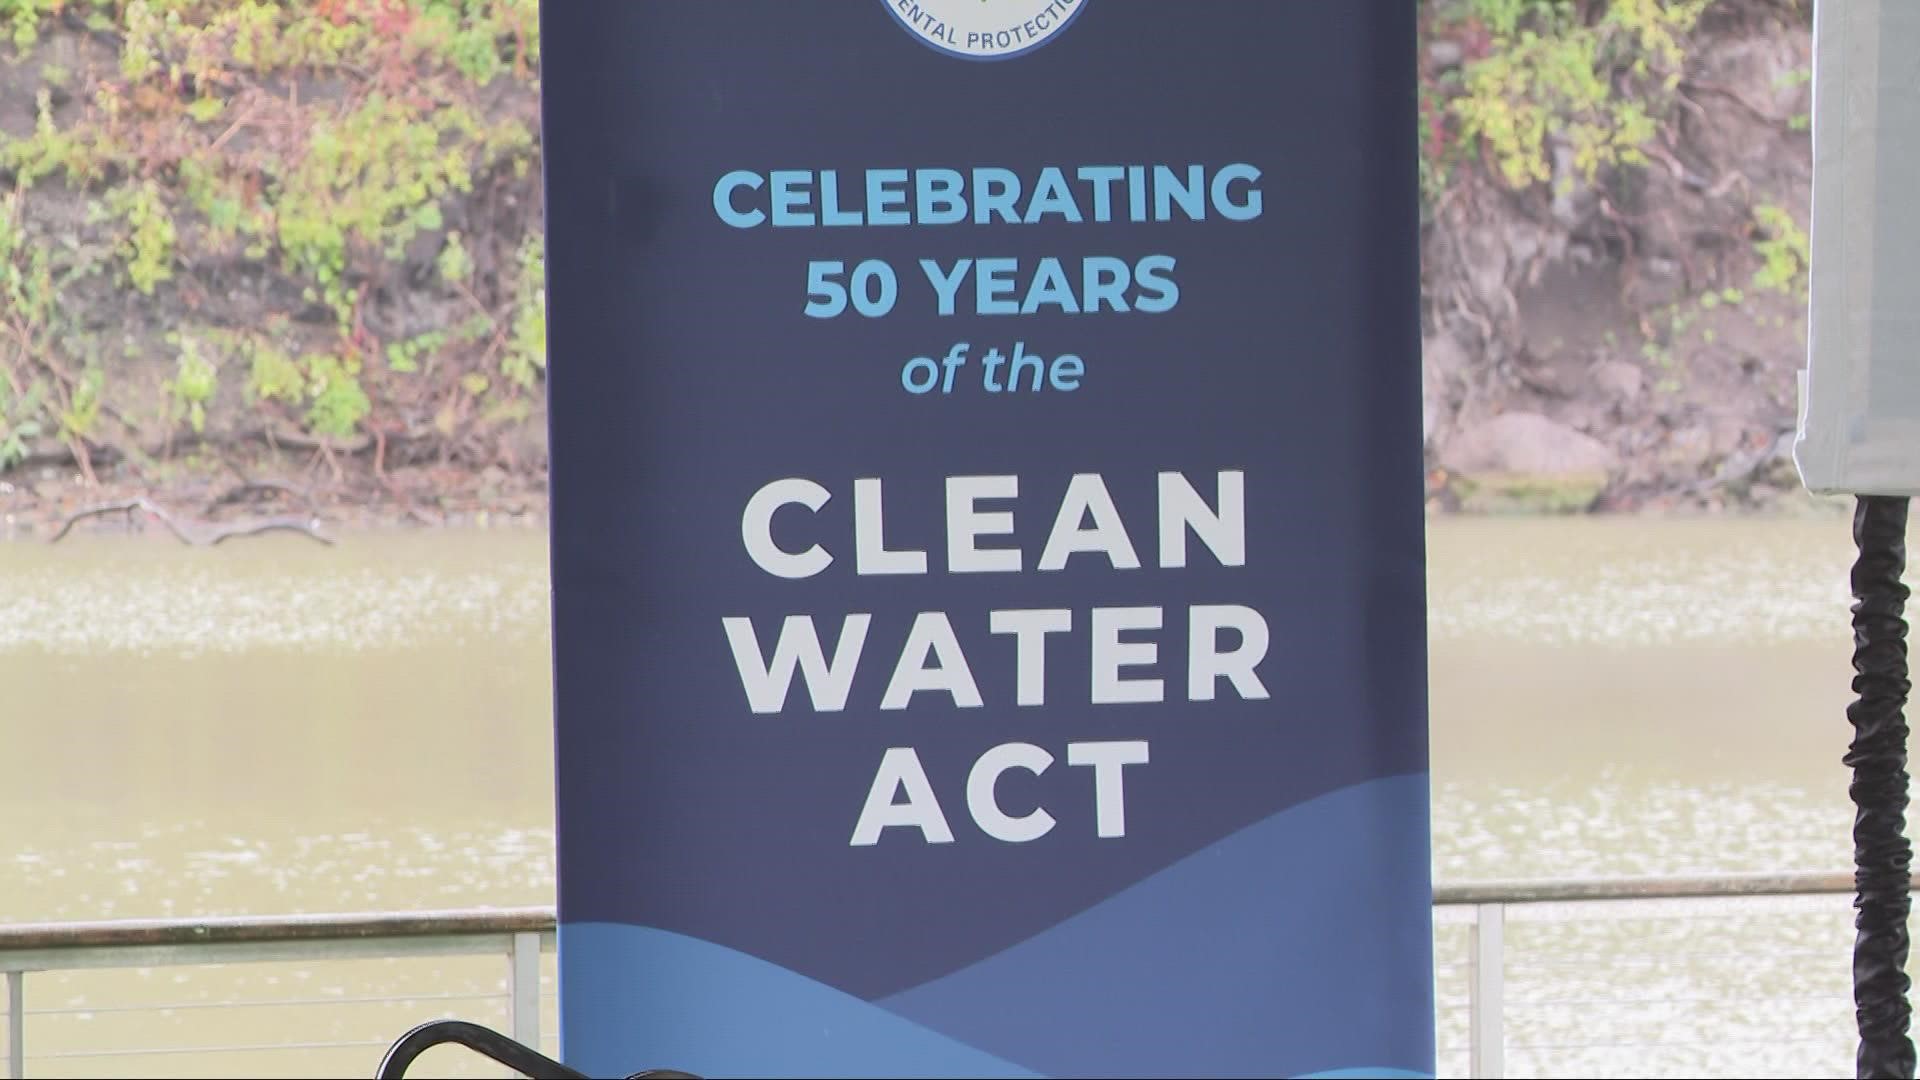 Organizers said the event is to showcase the 'role of past and future clean water investment and bipartisan legislation in transforming the nation's waterways.'